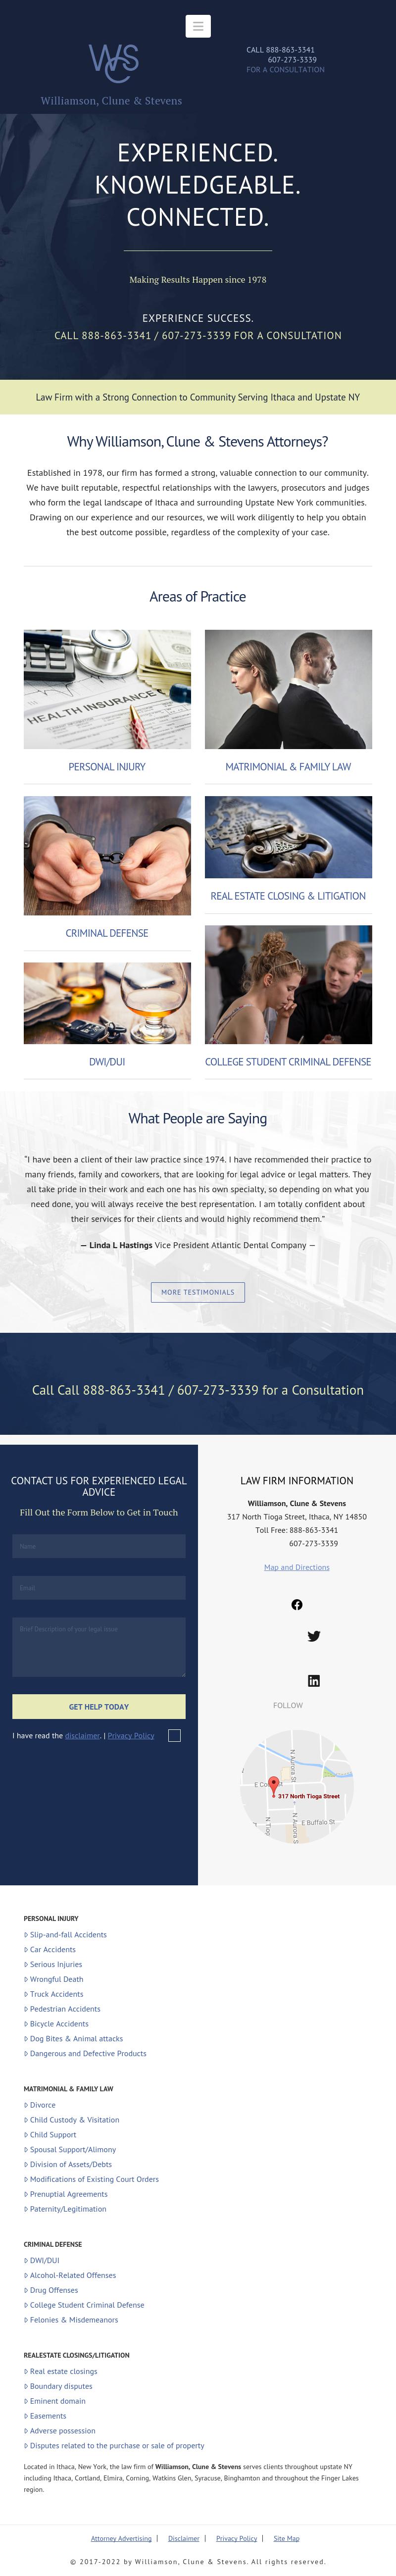 Williamson, Clune & Stevens - Ithaca NY Lawyers